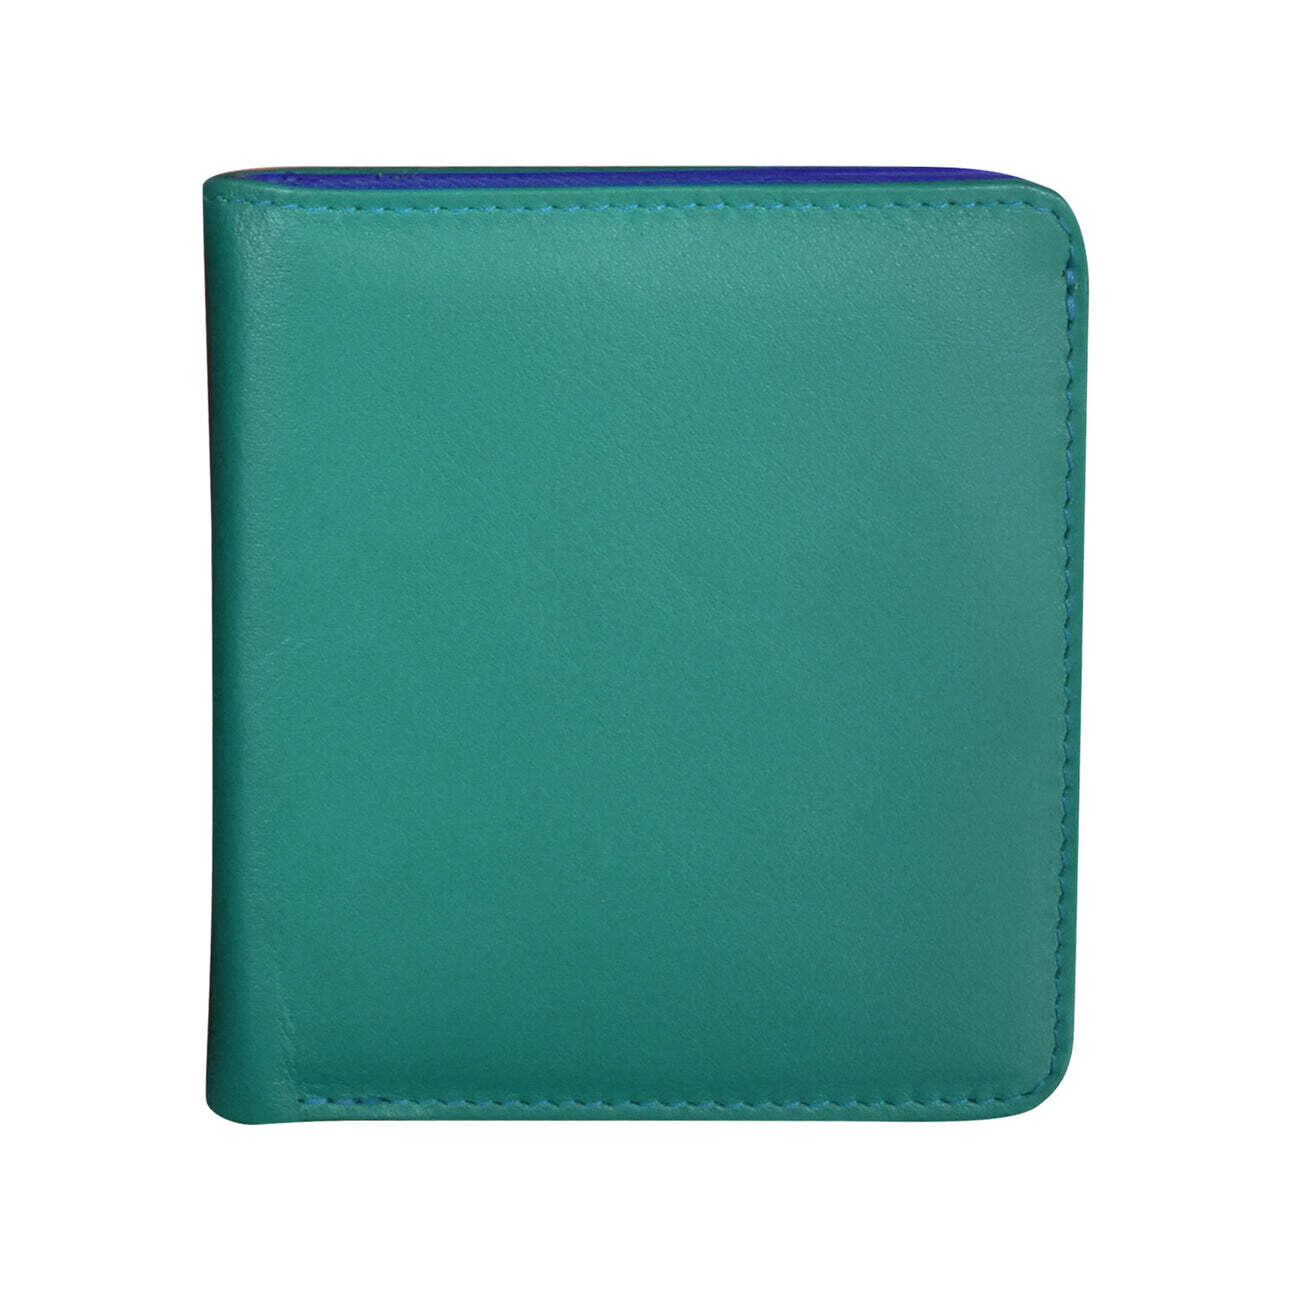 Two Tone Wallet Teal